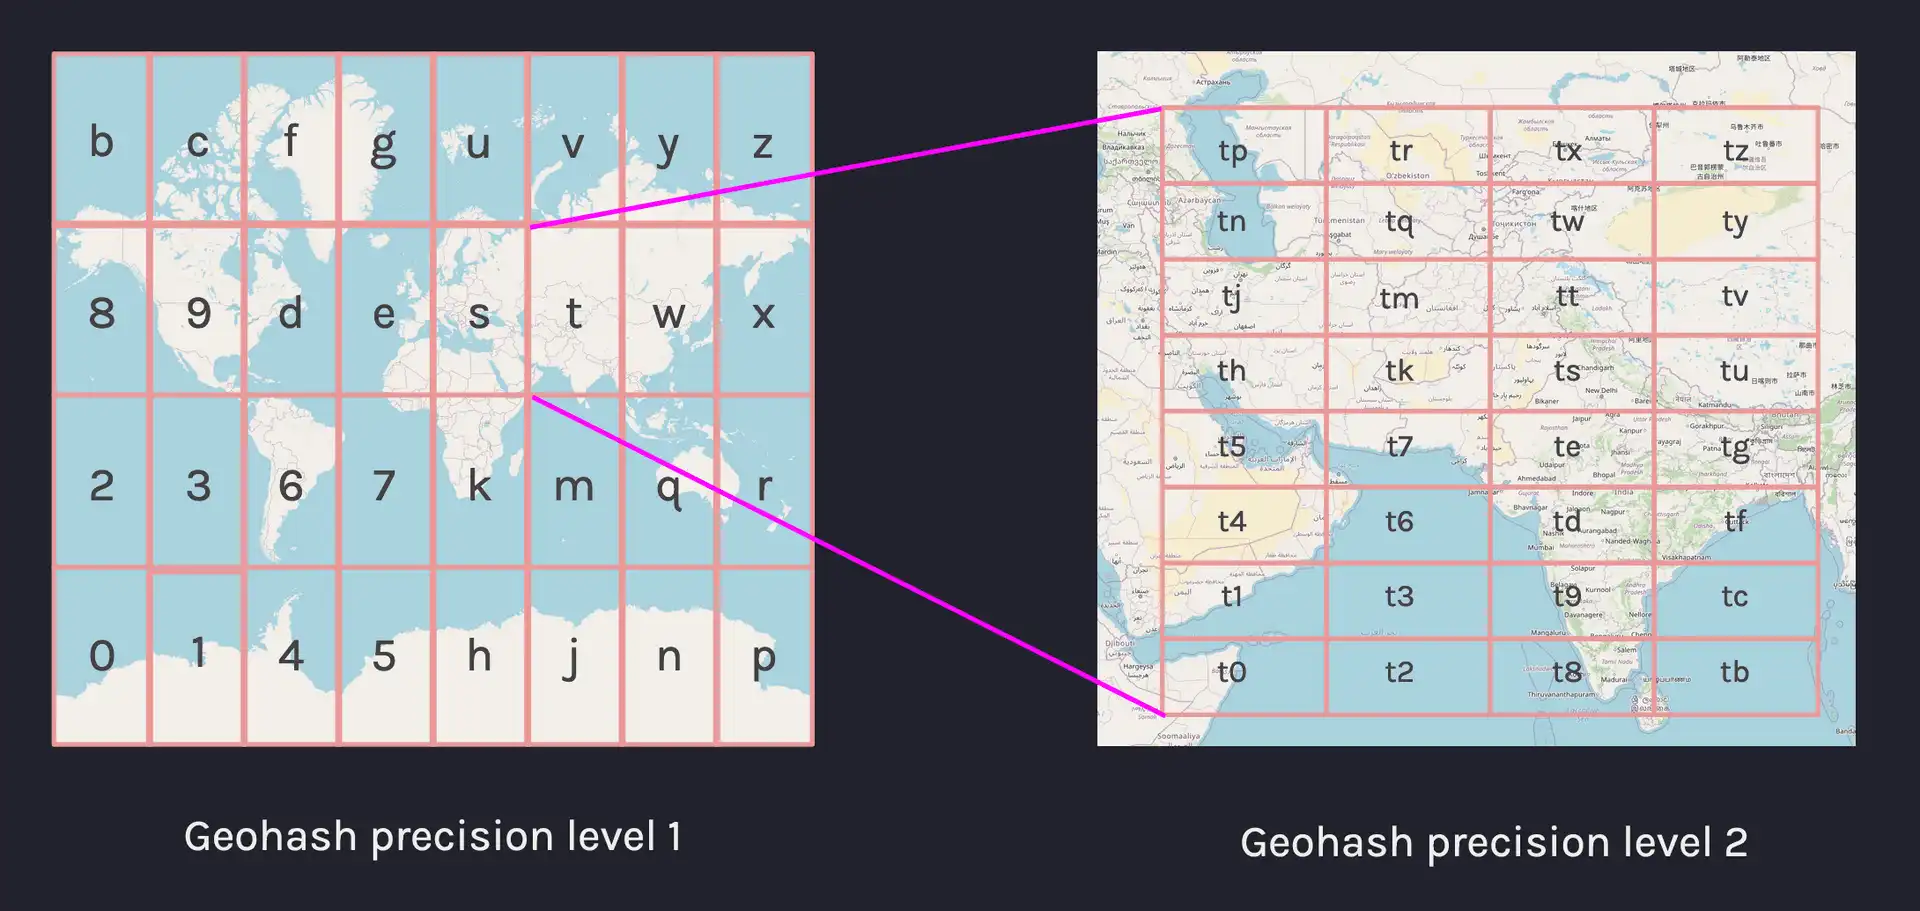 An illustration showing two maps with different geohash precision levels applied